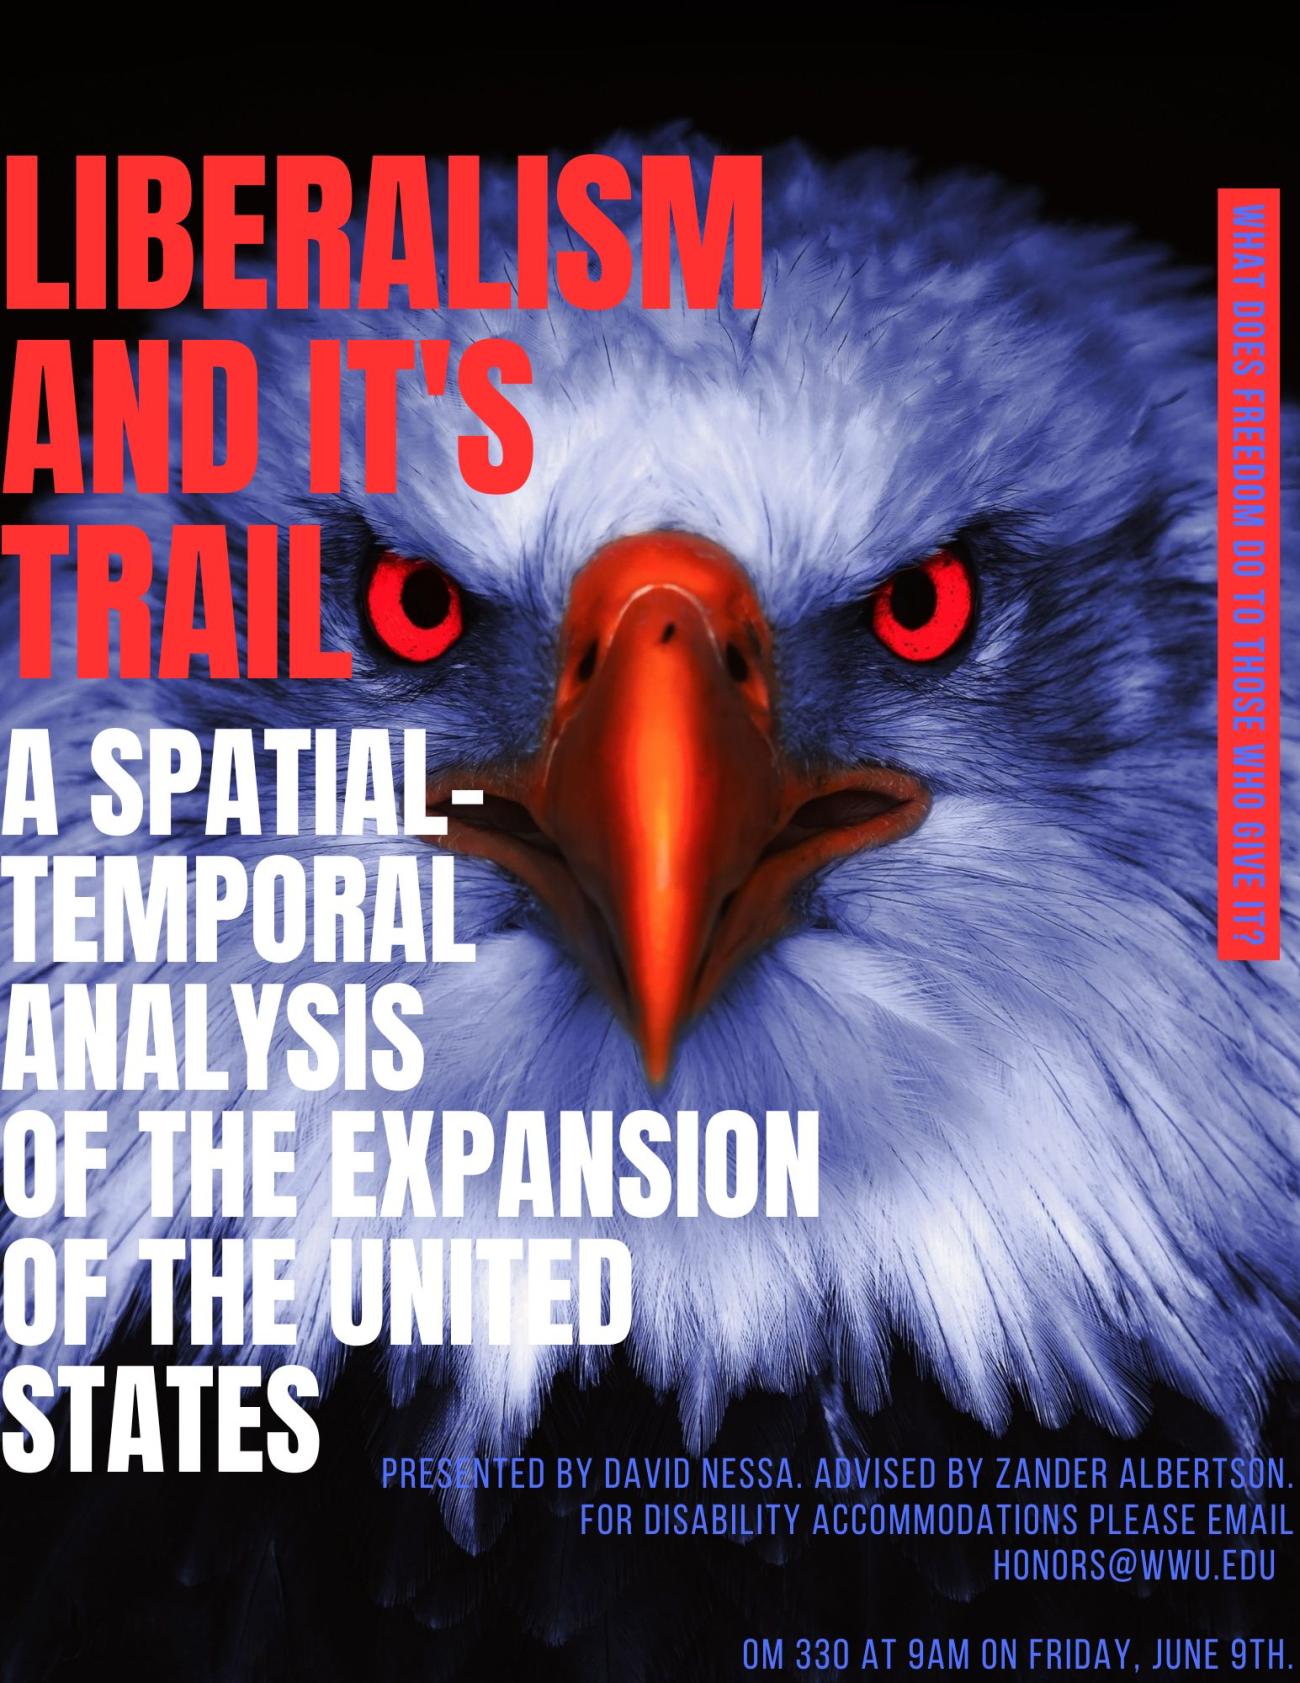 Title in red letters, Liberalism and it's Trail, with subtitle under in white letters, reading, a spatial-temporal analysis of the expansion of the United States. Vertical sentence on the right with blue letters and a red box, reading, what does freedom do to those who give it? Letters in blue say "Presented by David Nessa. Advised by Zander Albertson. For Disability accommodations please email honors@wwu.edu. OM 330 at 9AM on Friday, June 9th." Background is an eagle face in the center, who has red eyes.